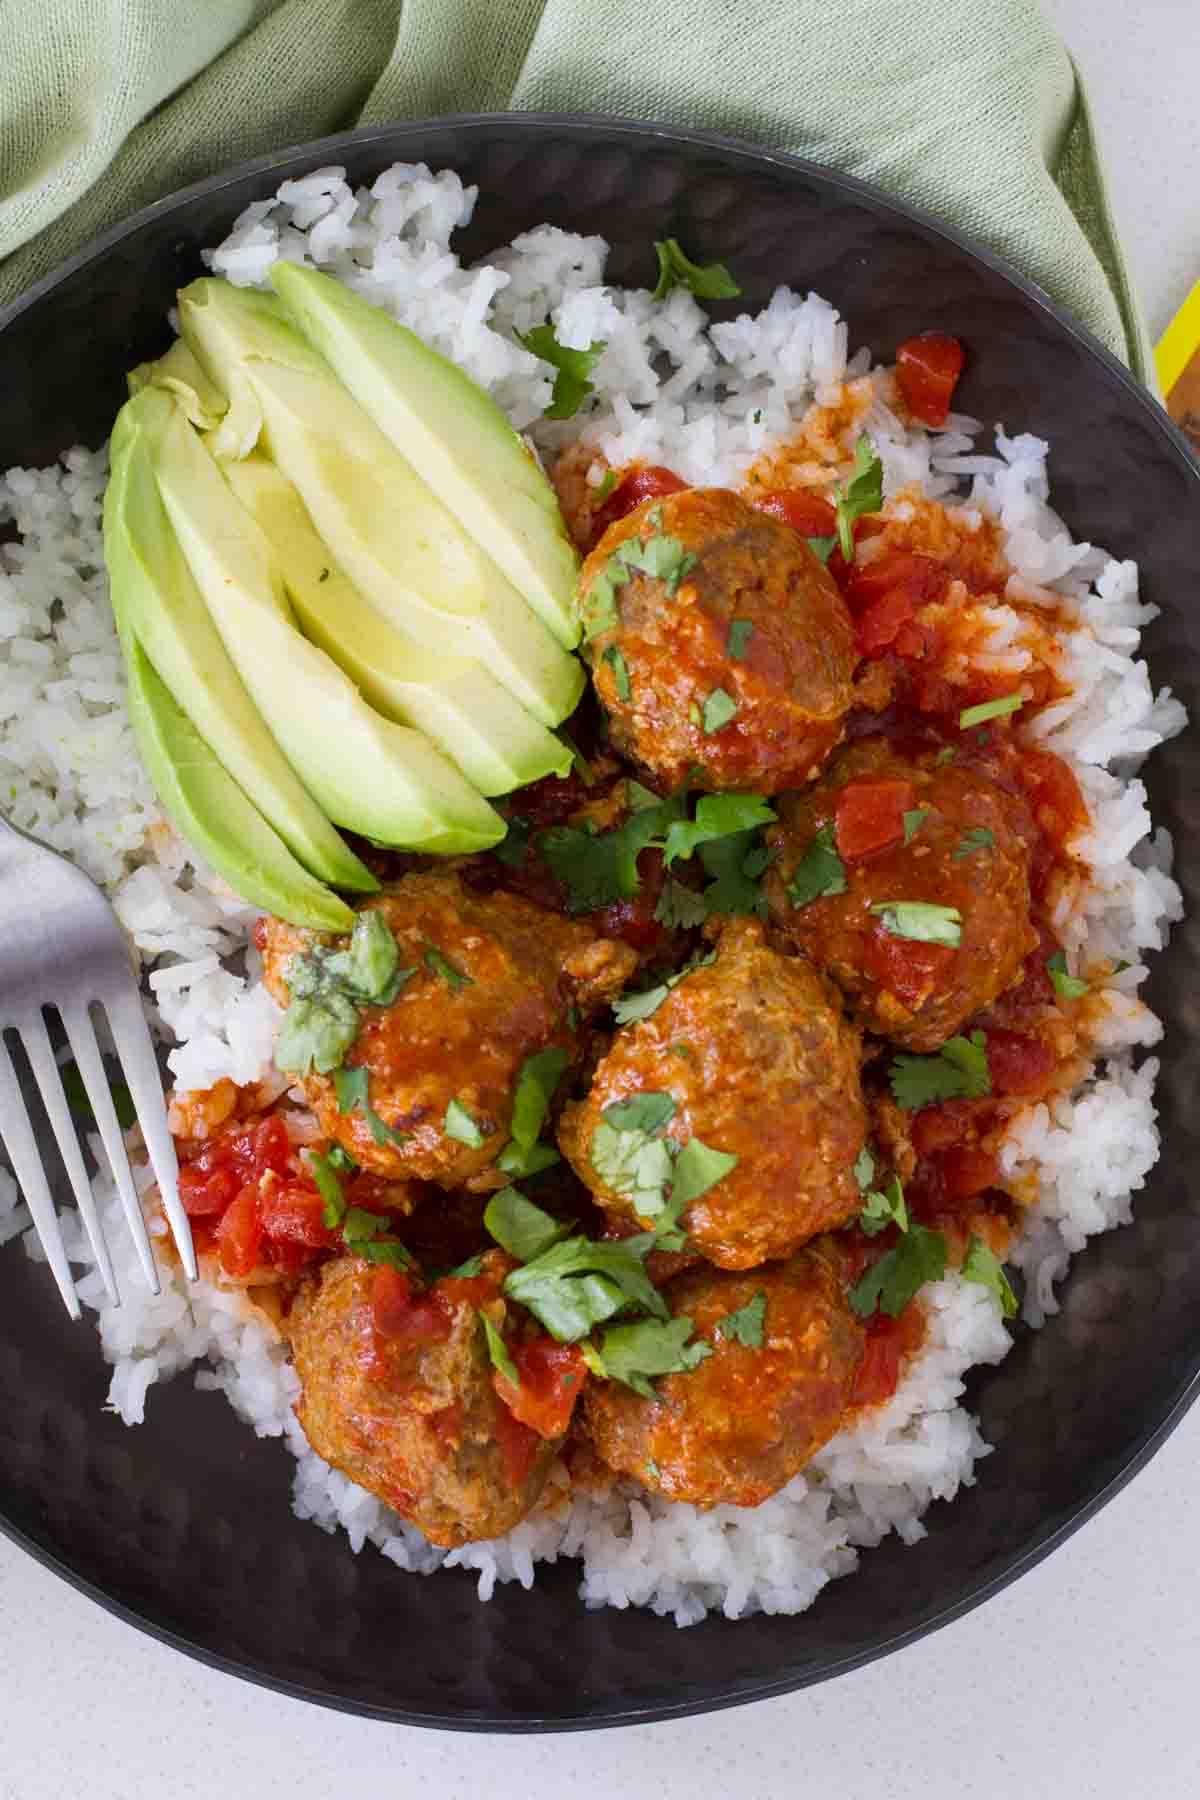 Slow Cooker Mexican Meatballs over rice, with cilantro and a sliced avocado.